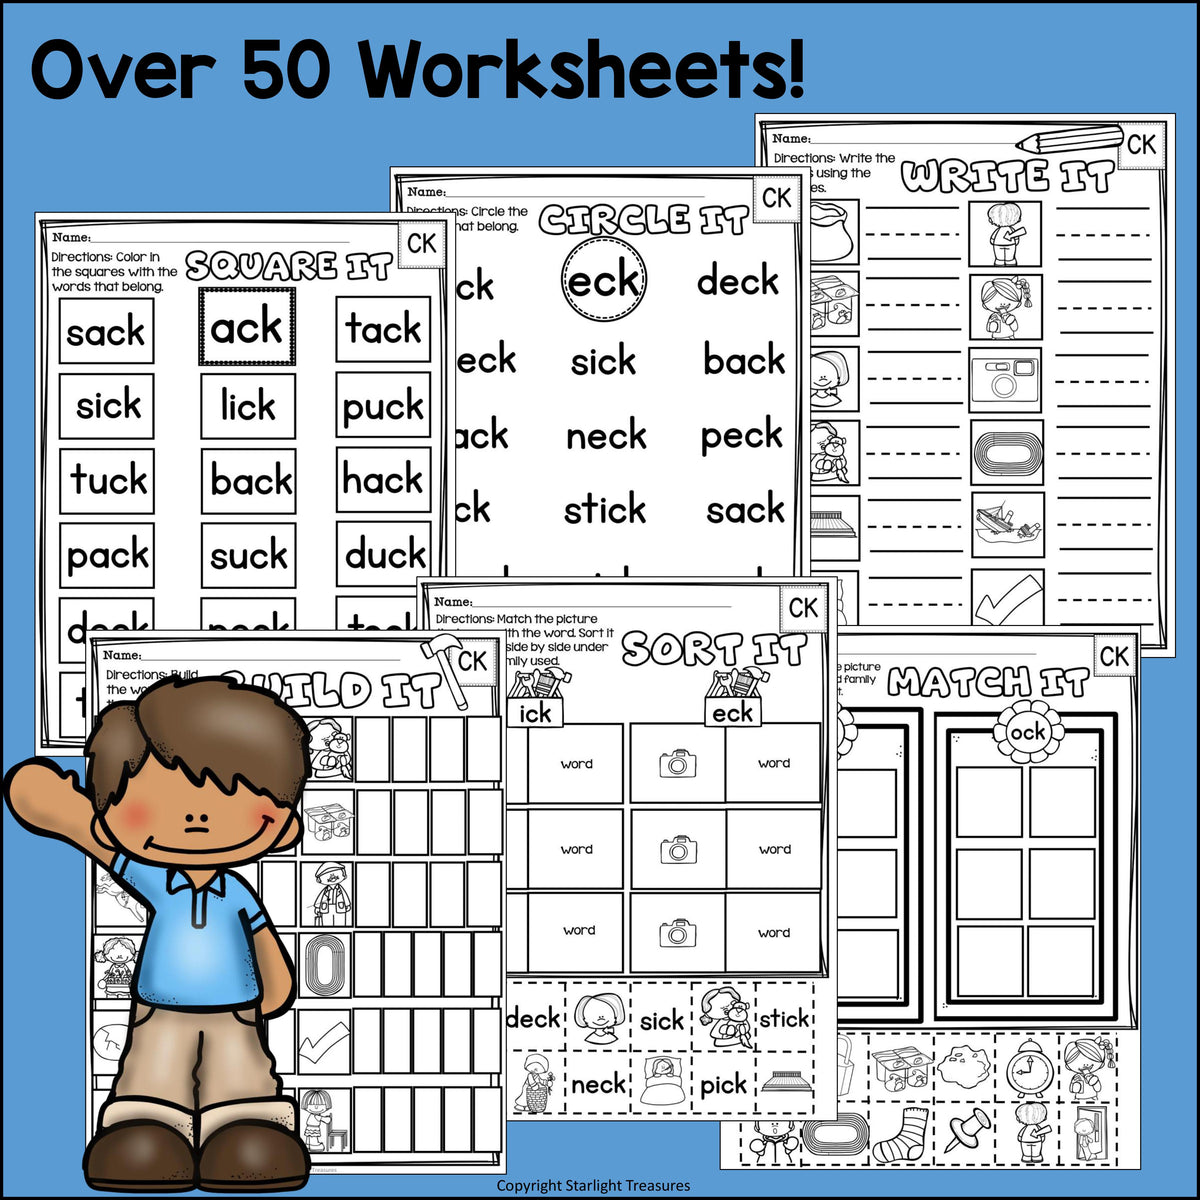 Words Ending in CK Worksheets and Activities for Early Readers - Phoni